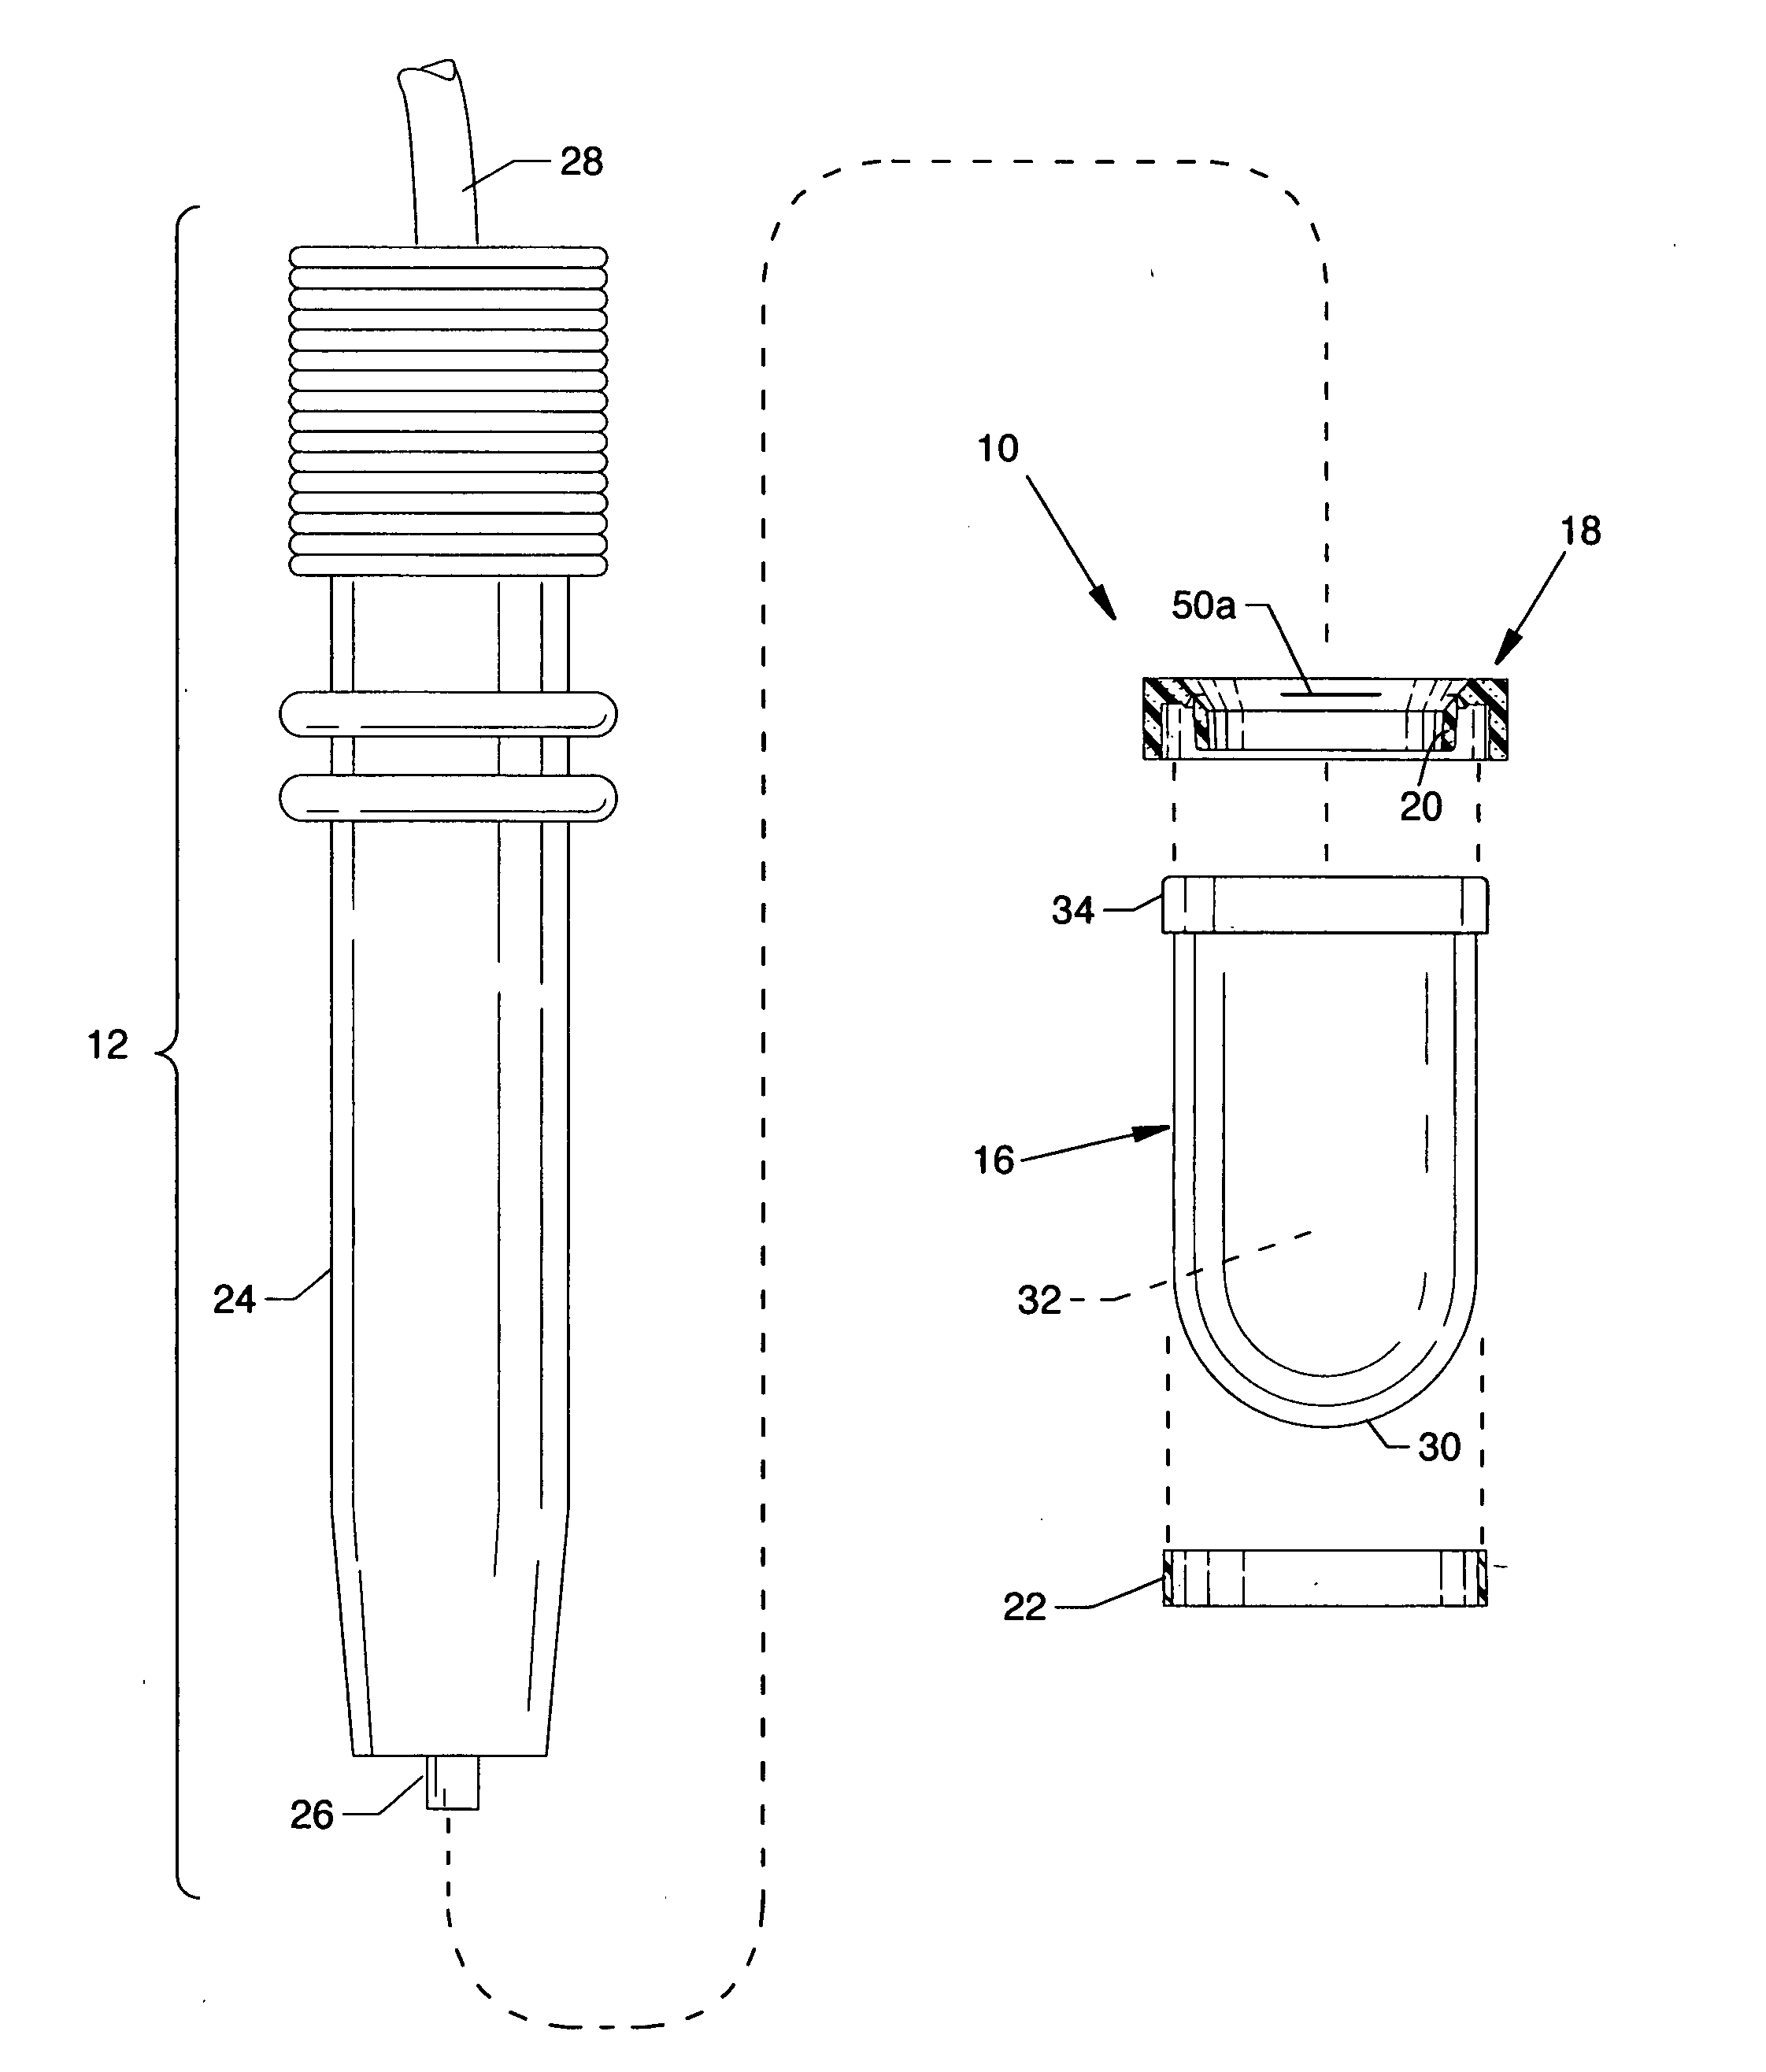 Immersion bag system for use with an ultrasound probe